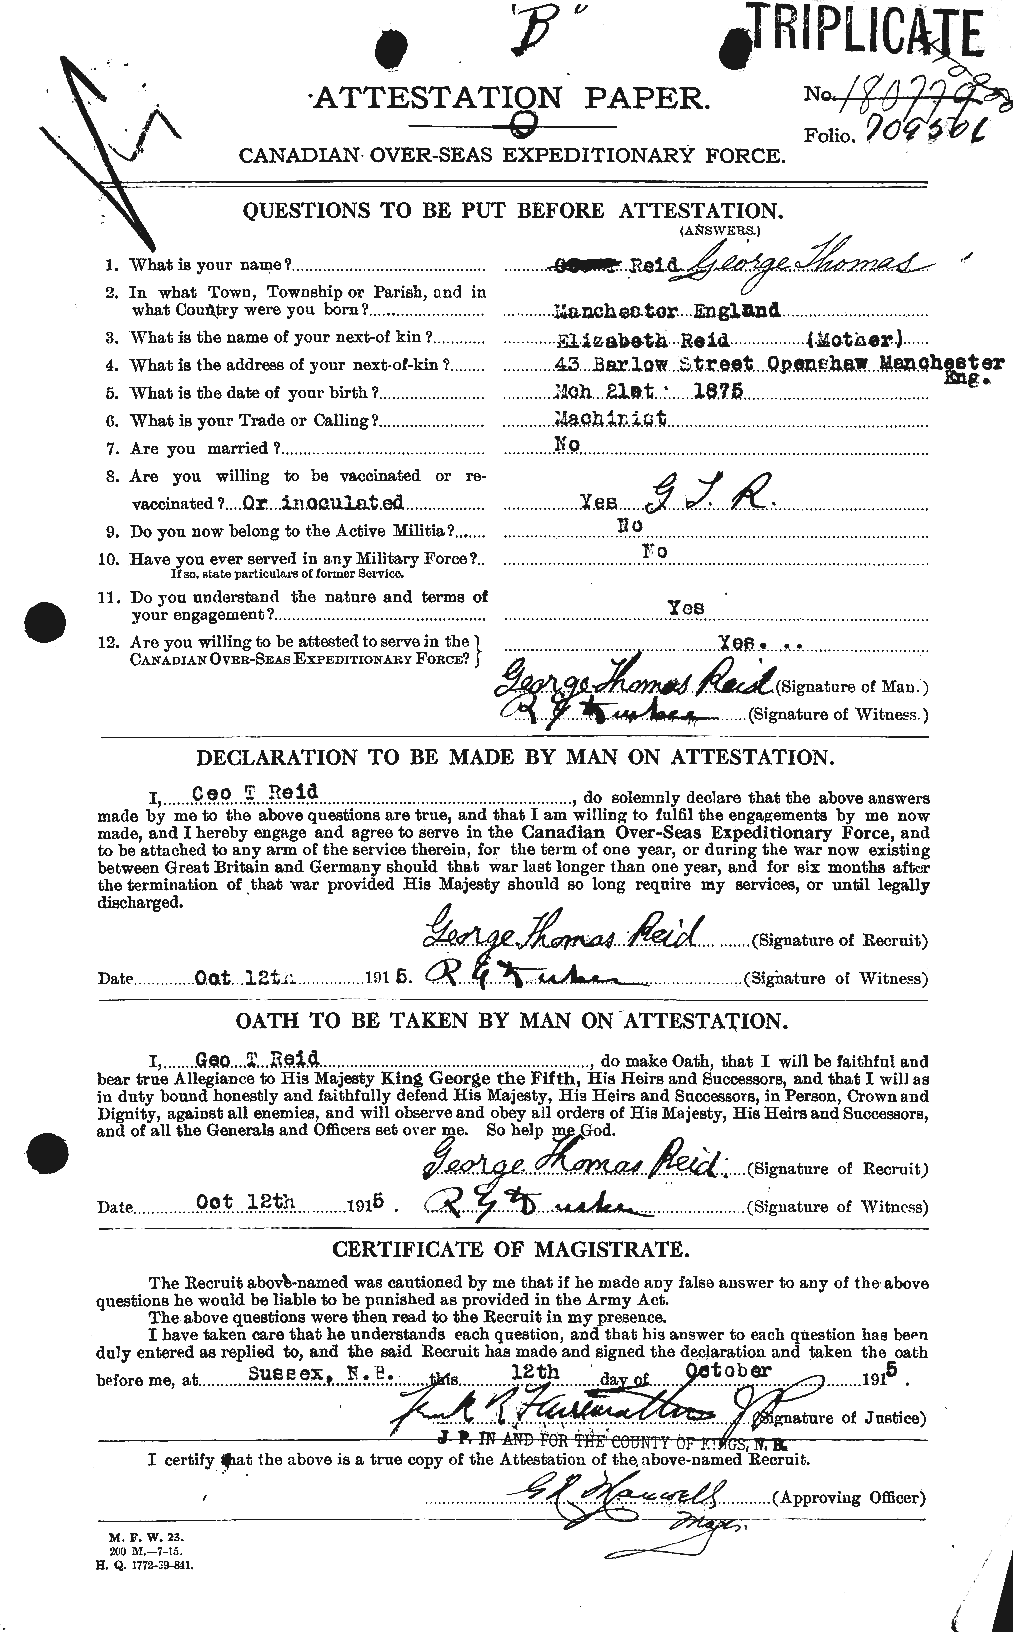 Personnel Records of the First World War - CEF 598542a